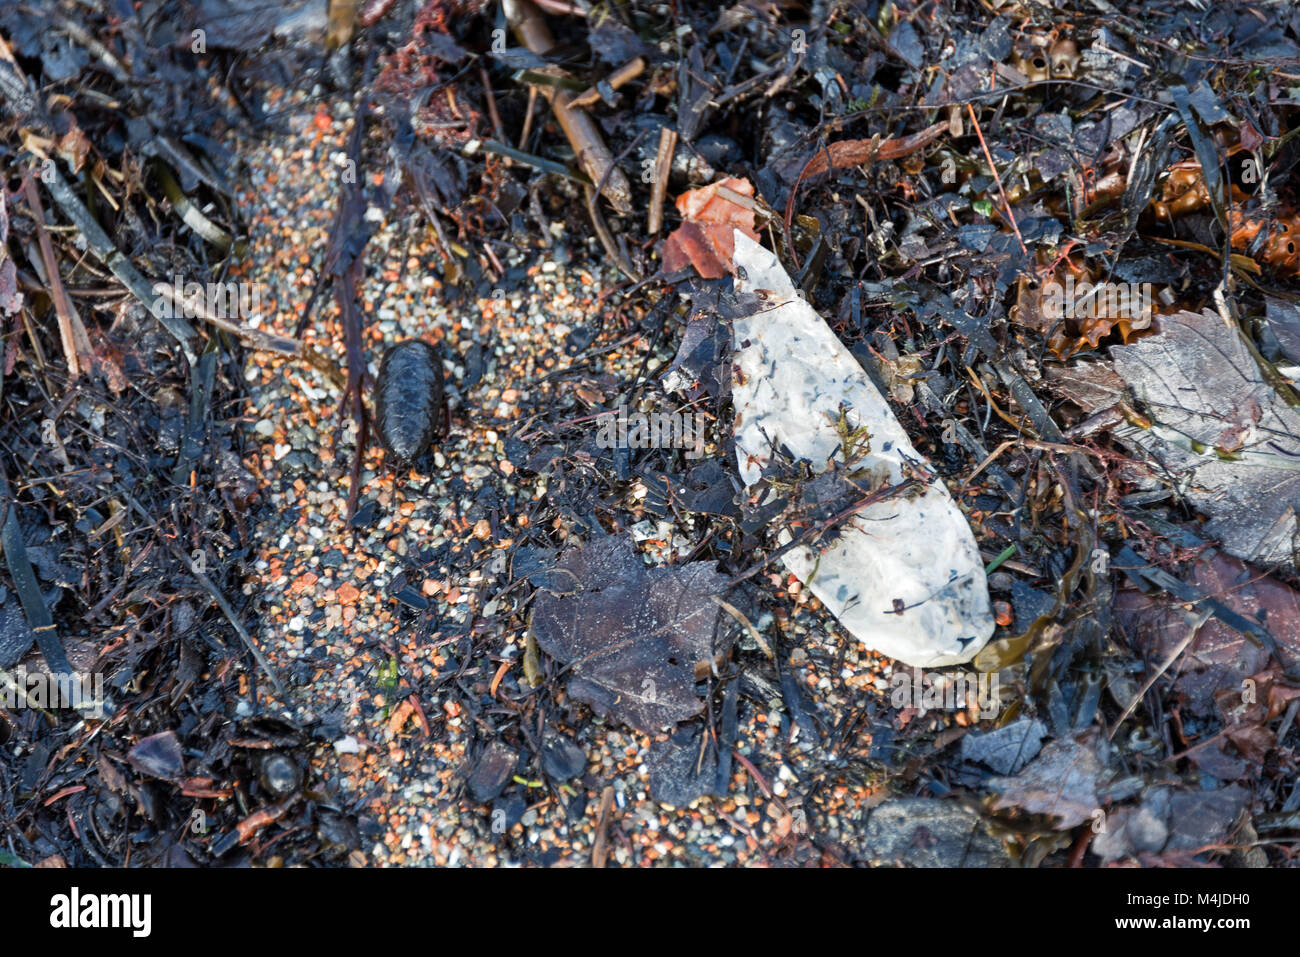 Marine debris and plastic pollution: a used condom washed up on the beach in Seal Harbor, Maine. Stock Photo